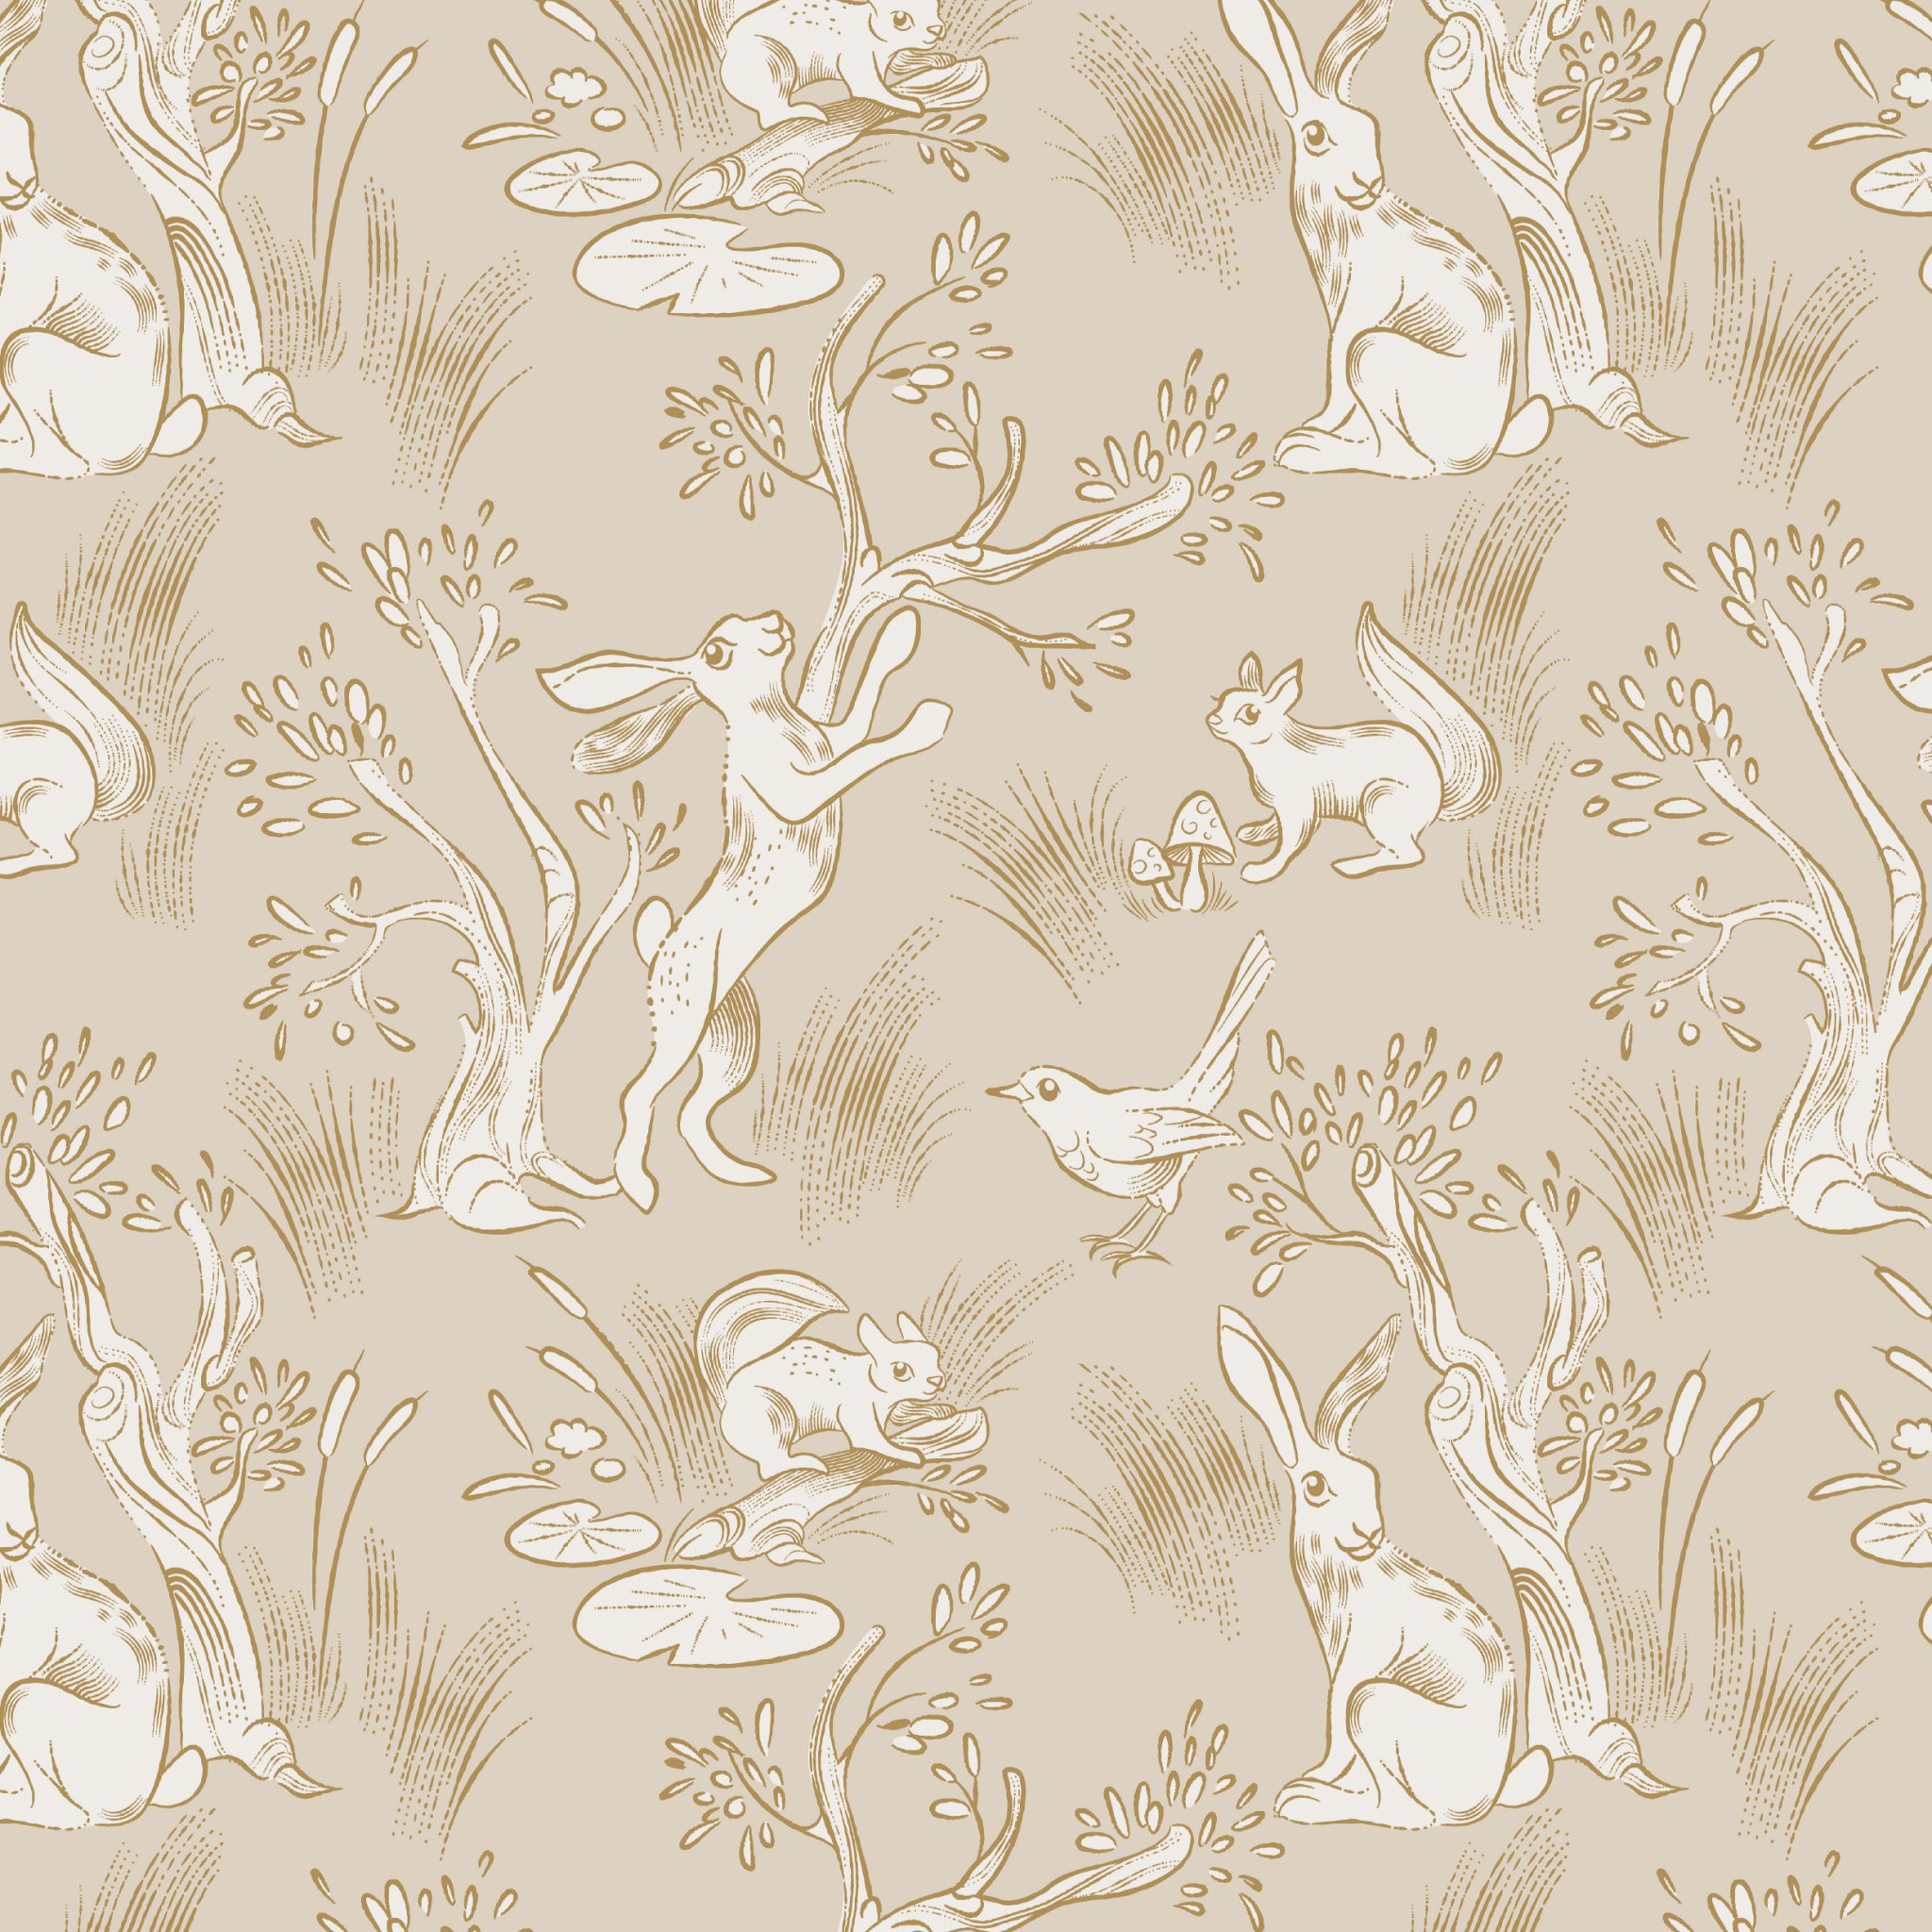 A sample of neutral nursery self-adhesive wallpaper with a hand-drawn design of woodland creatures and plants in beige tones